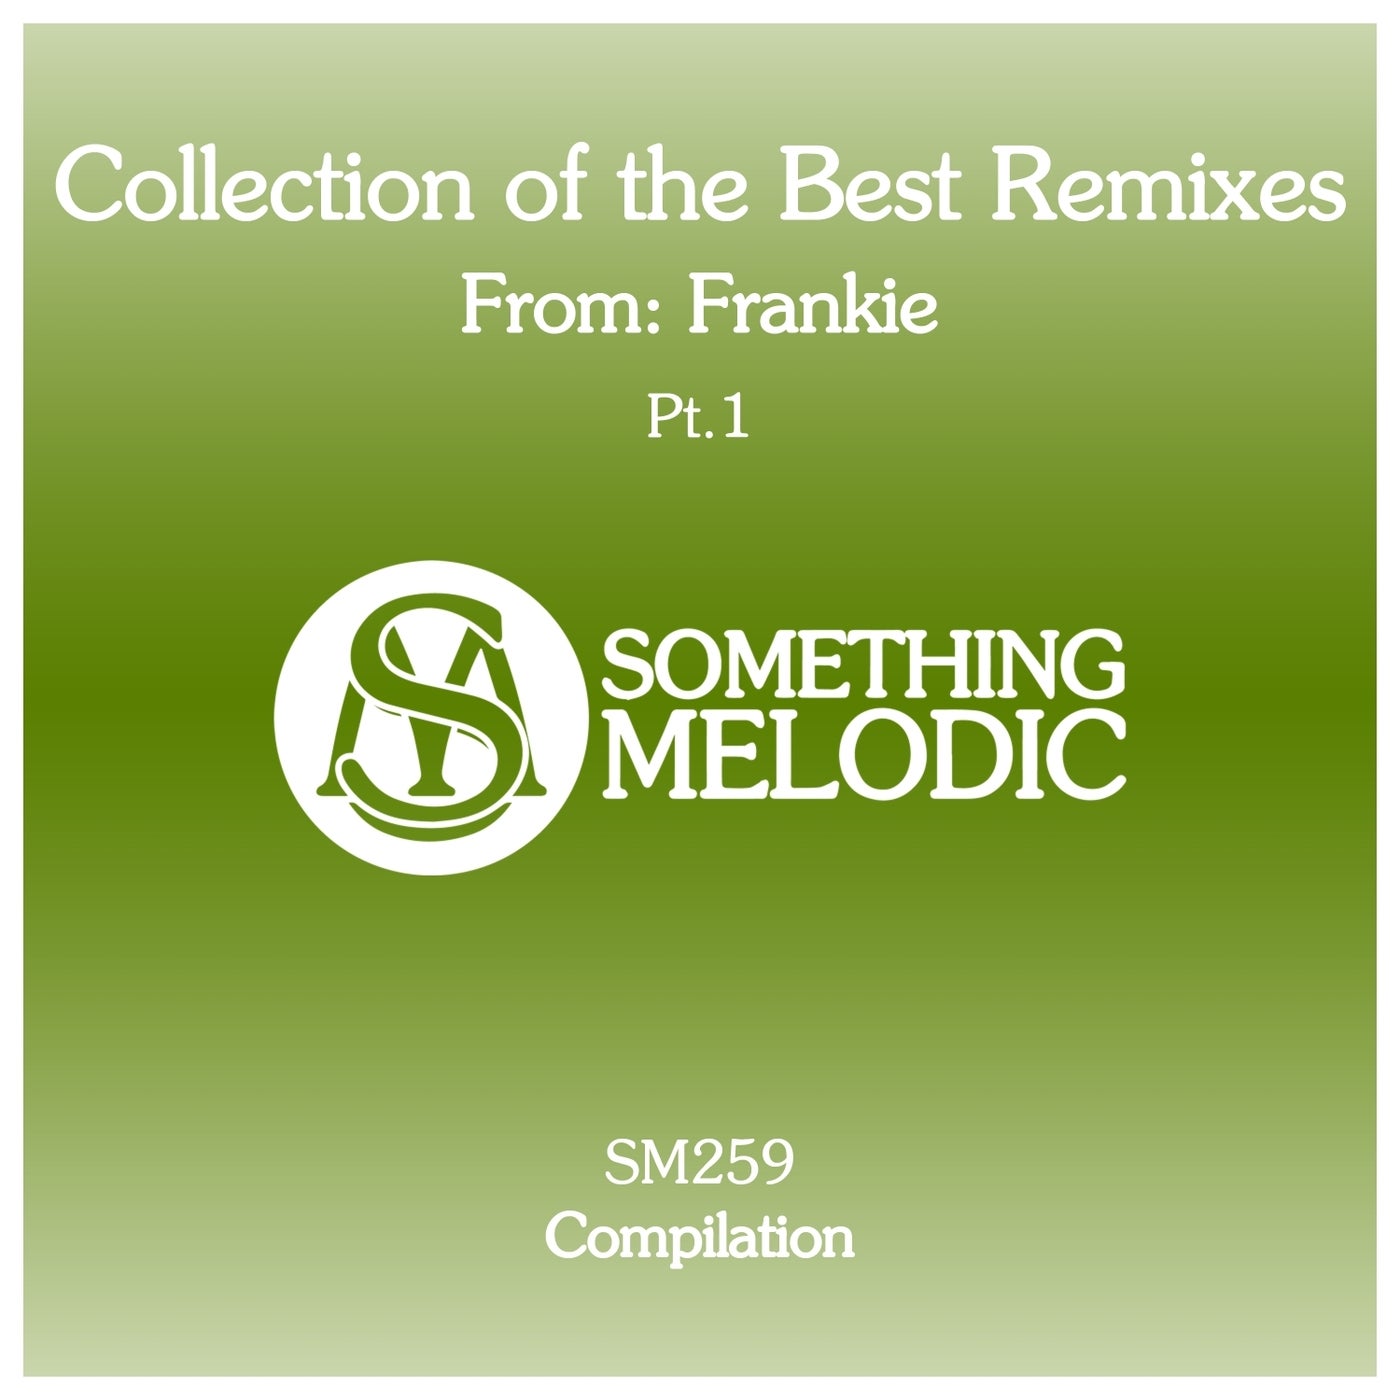 Collection of the Best Remixes From: Frankie, Pt. 1